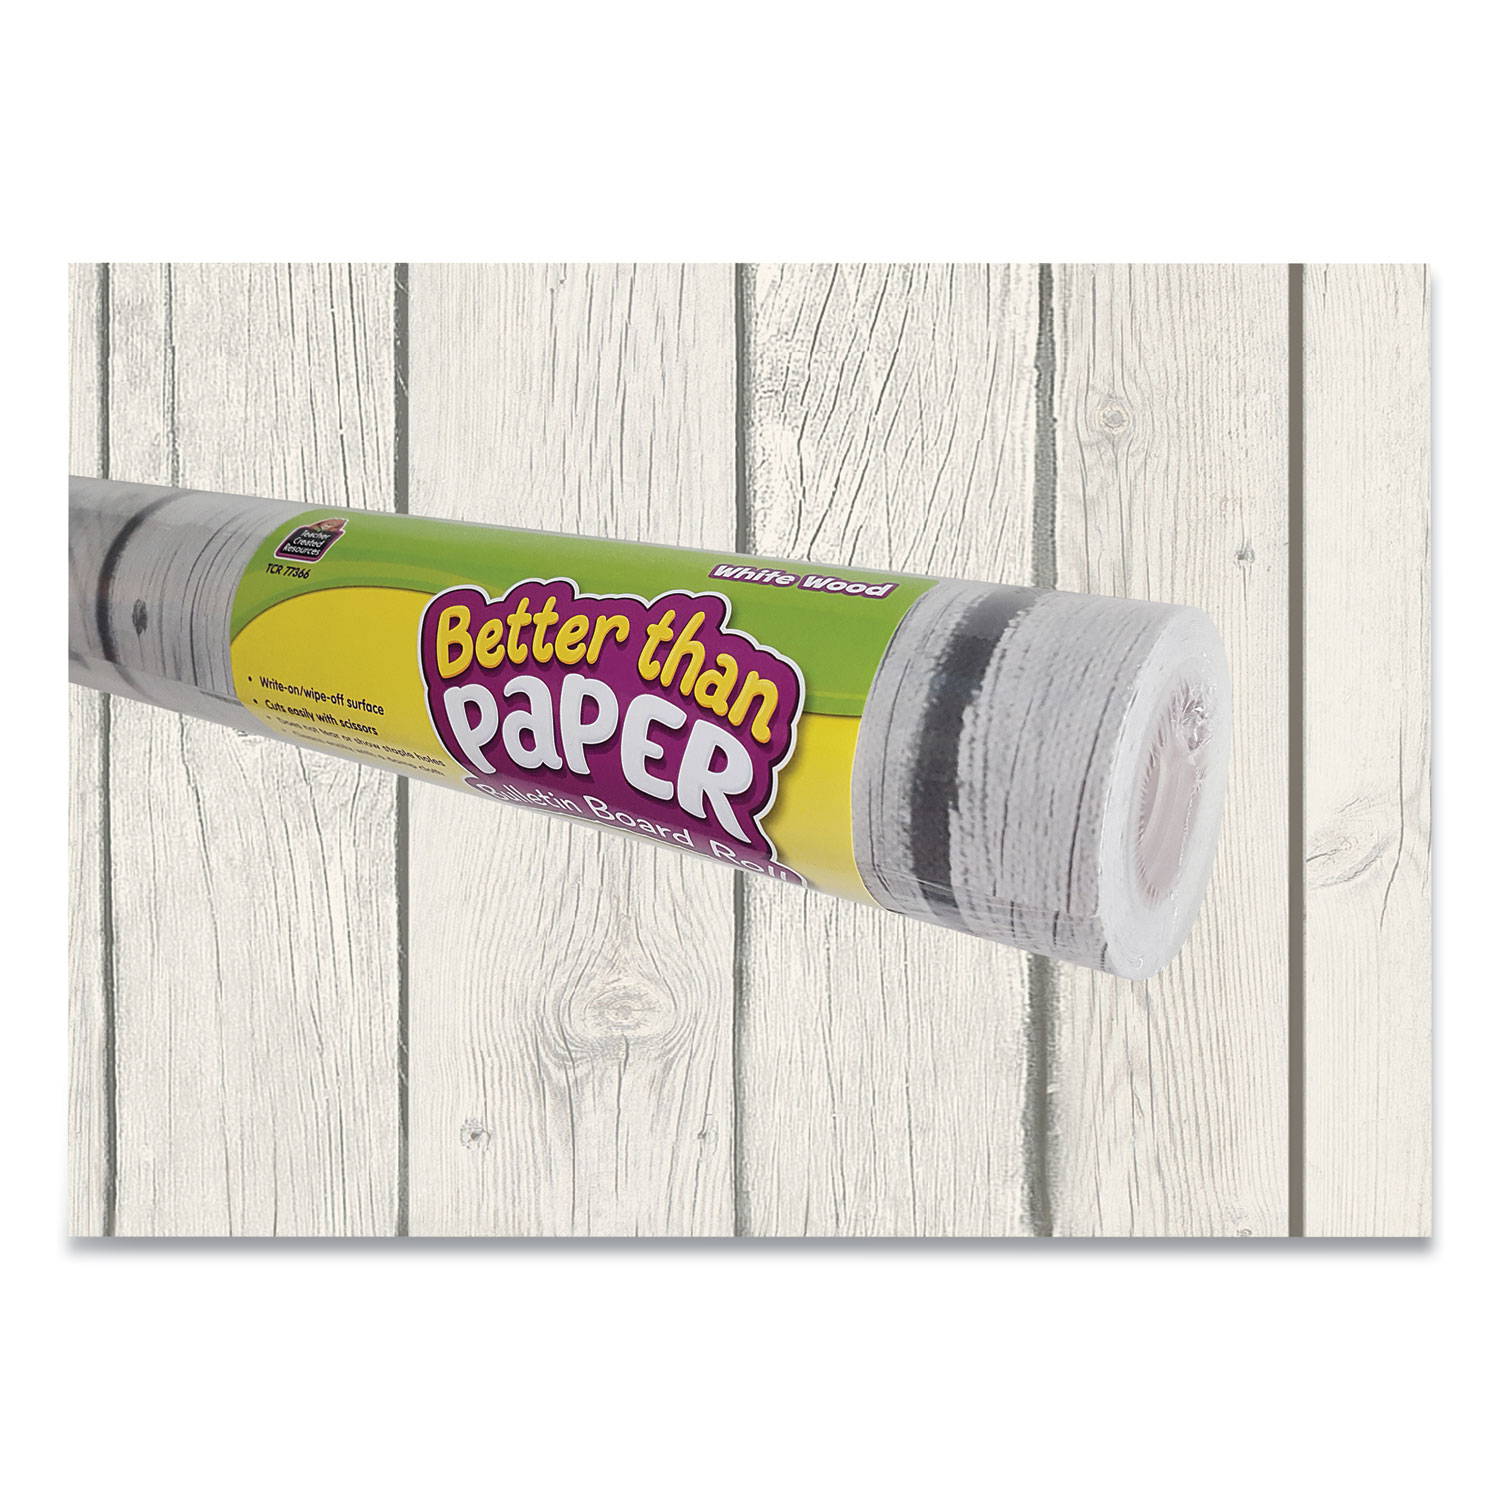 Teacher Created Resources Better Than Paper Bulletin Board Roll, 4 ft x 12 ft, White Wood